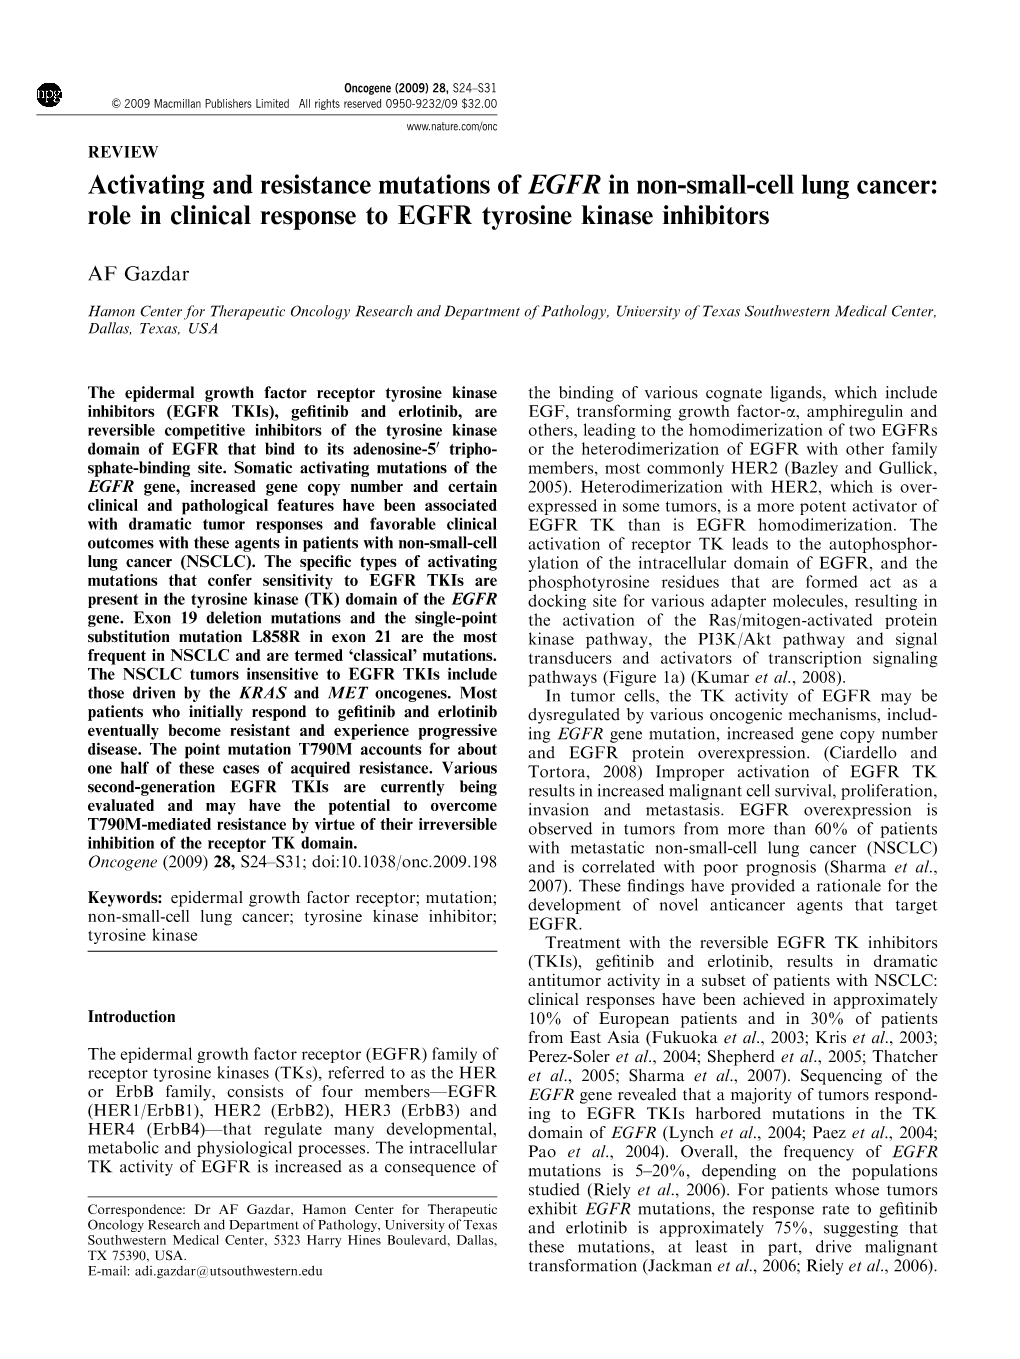 Activating and Resistance Mutations of EGFR in Non-Small-Cell Lung Cancer: Role in Clinical Response to EGFR Tyrosine Kinase Inhibitors